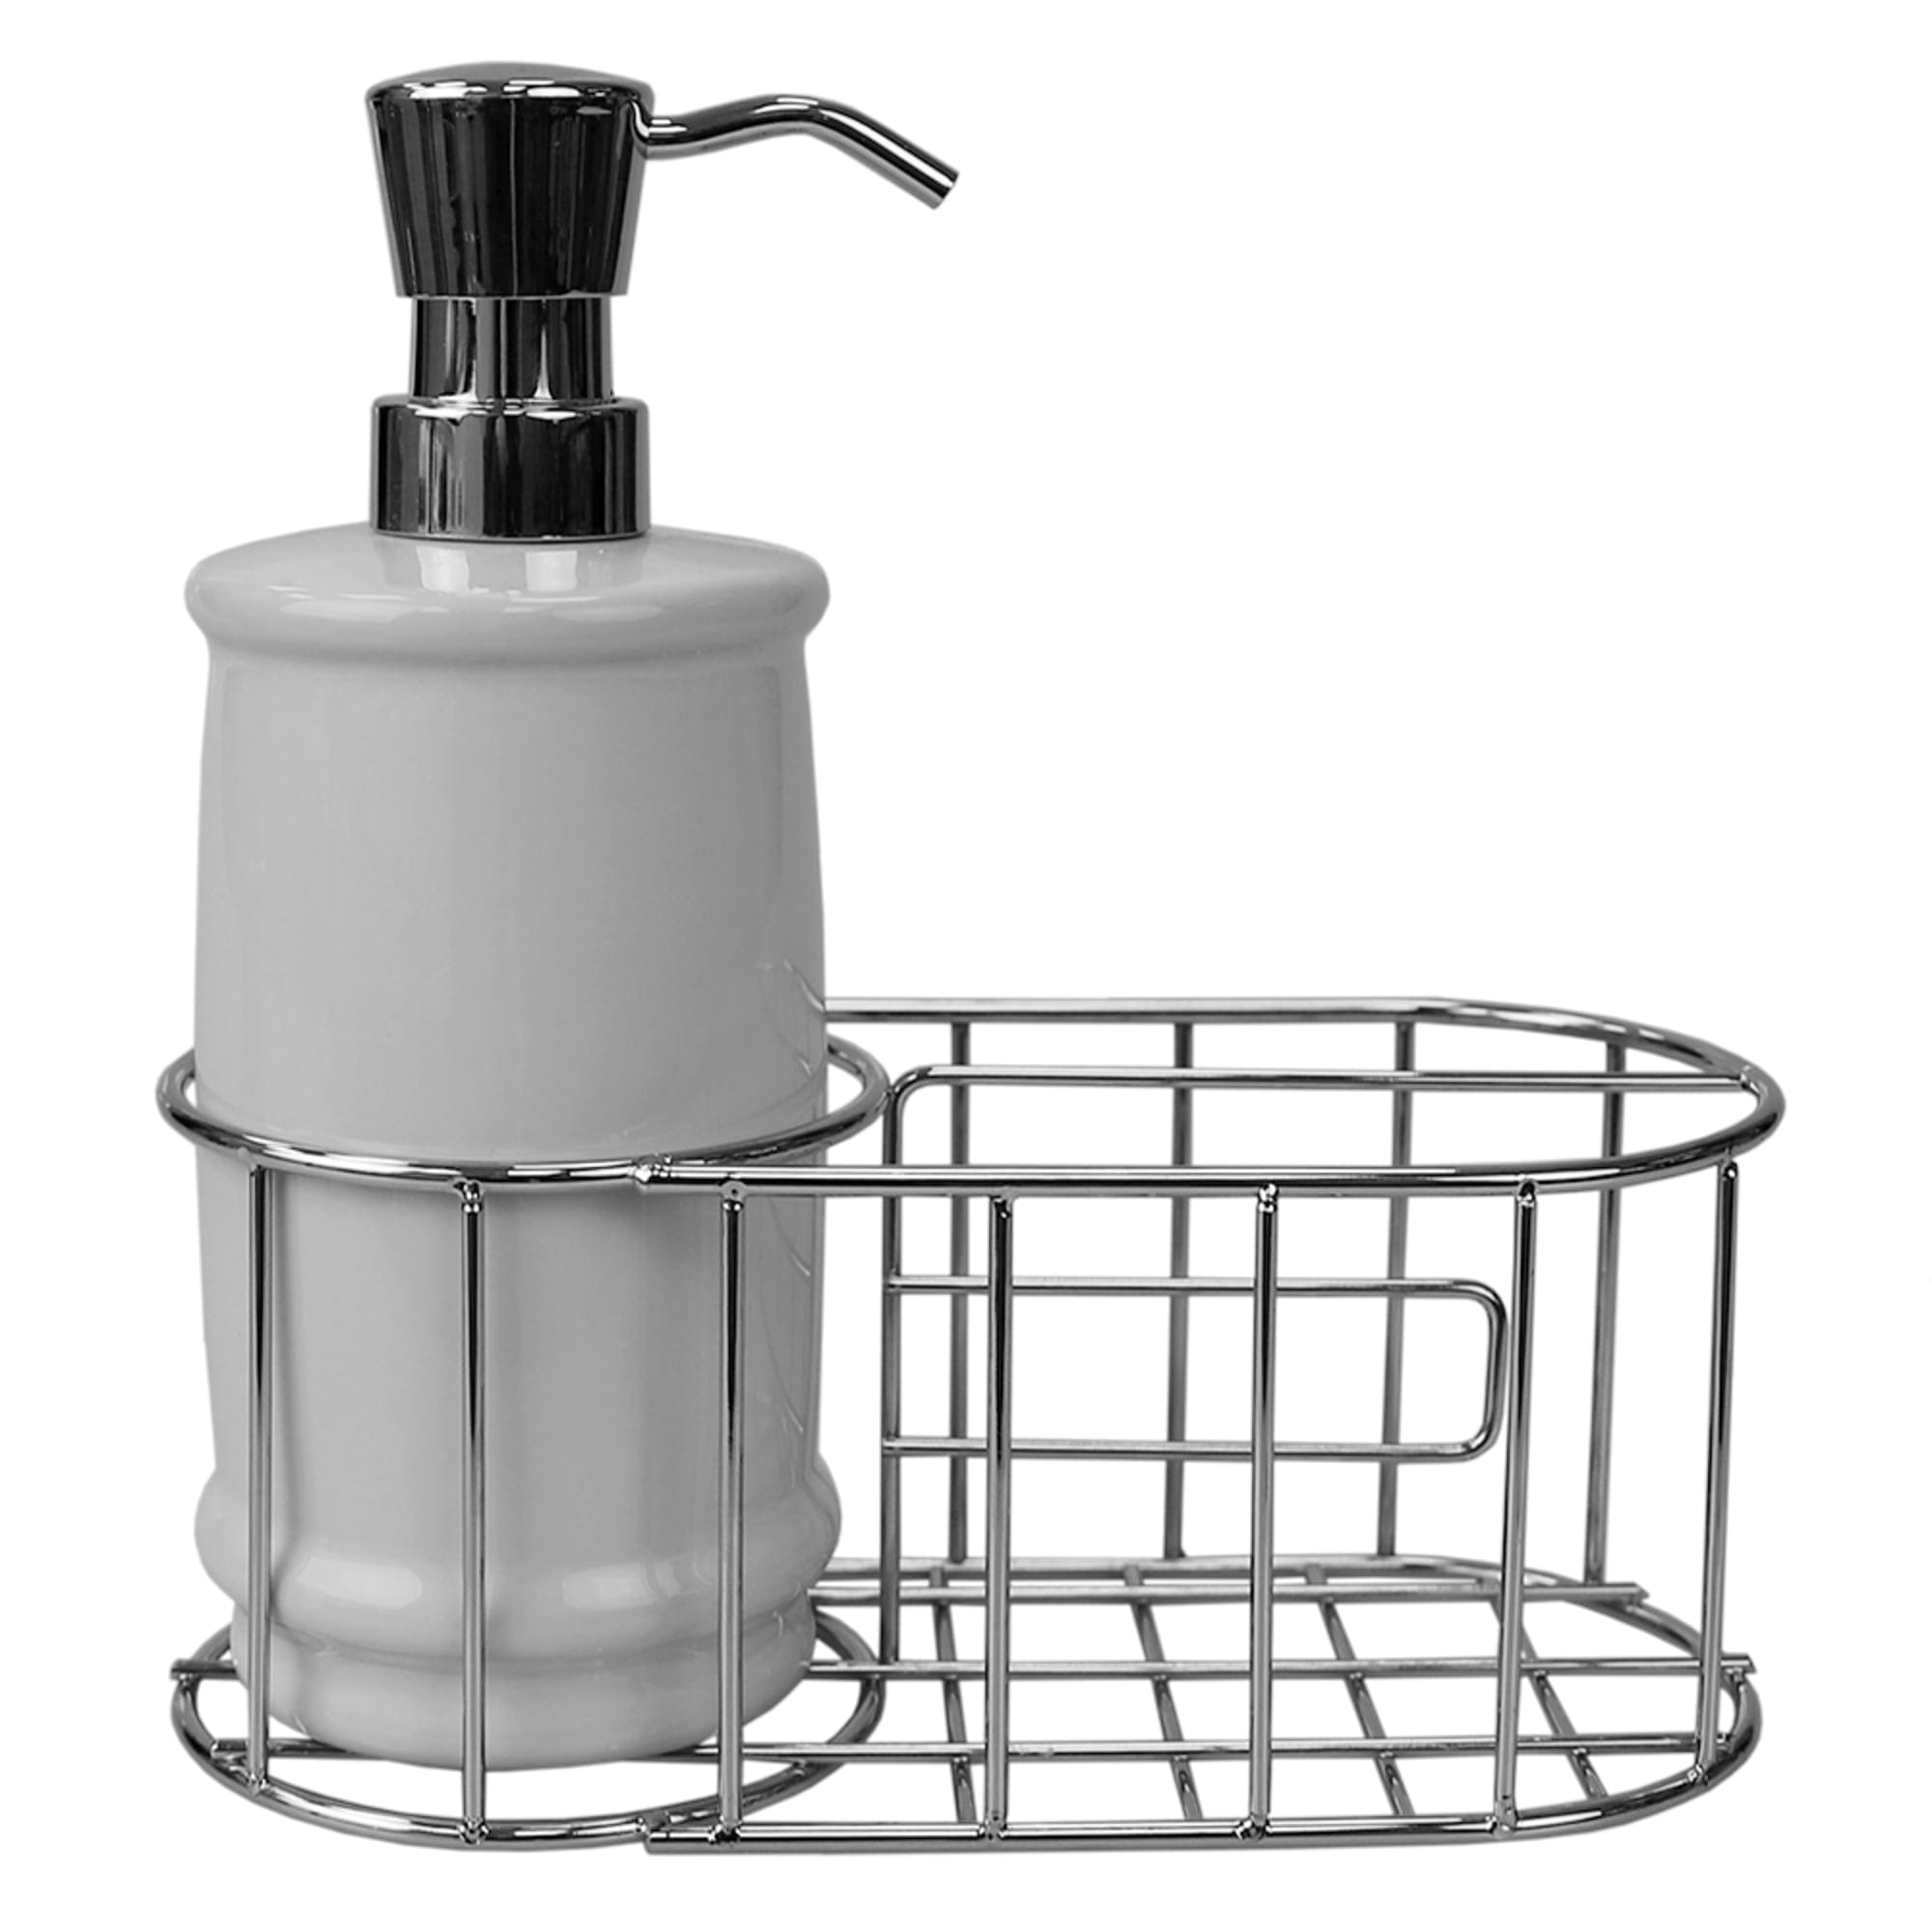 Home Basics 8 Oz Ceramic Soap Dispenser with Metal Caddy $8.00 EACH, CASE PACK OF 12